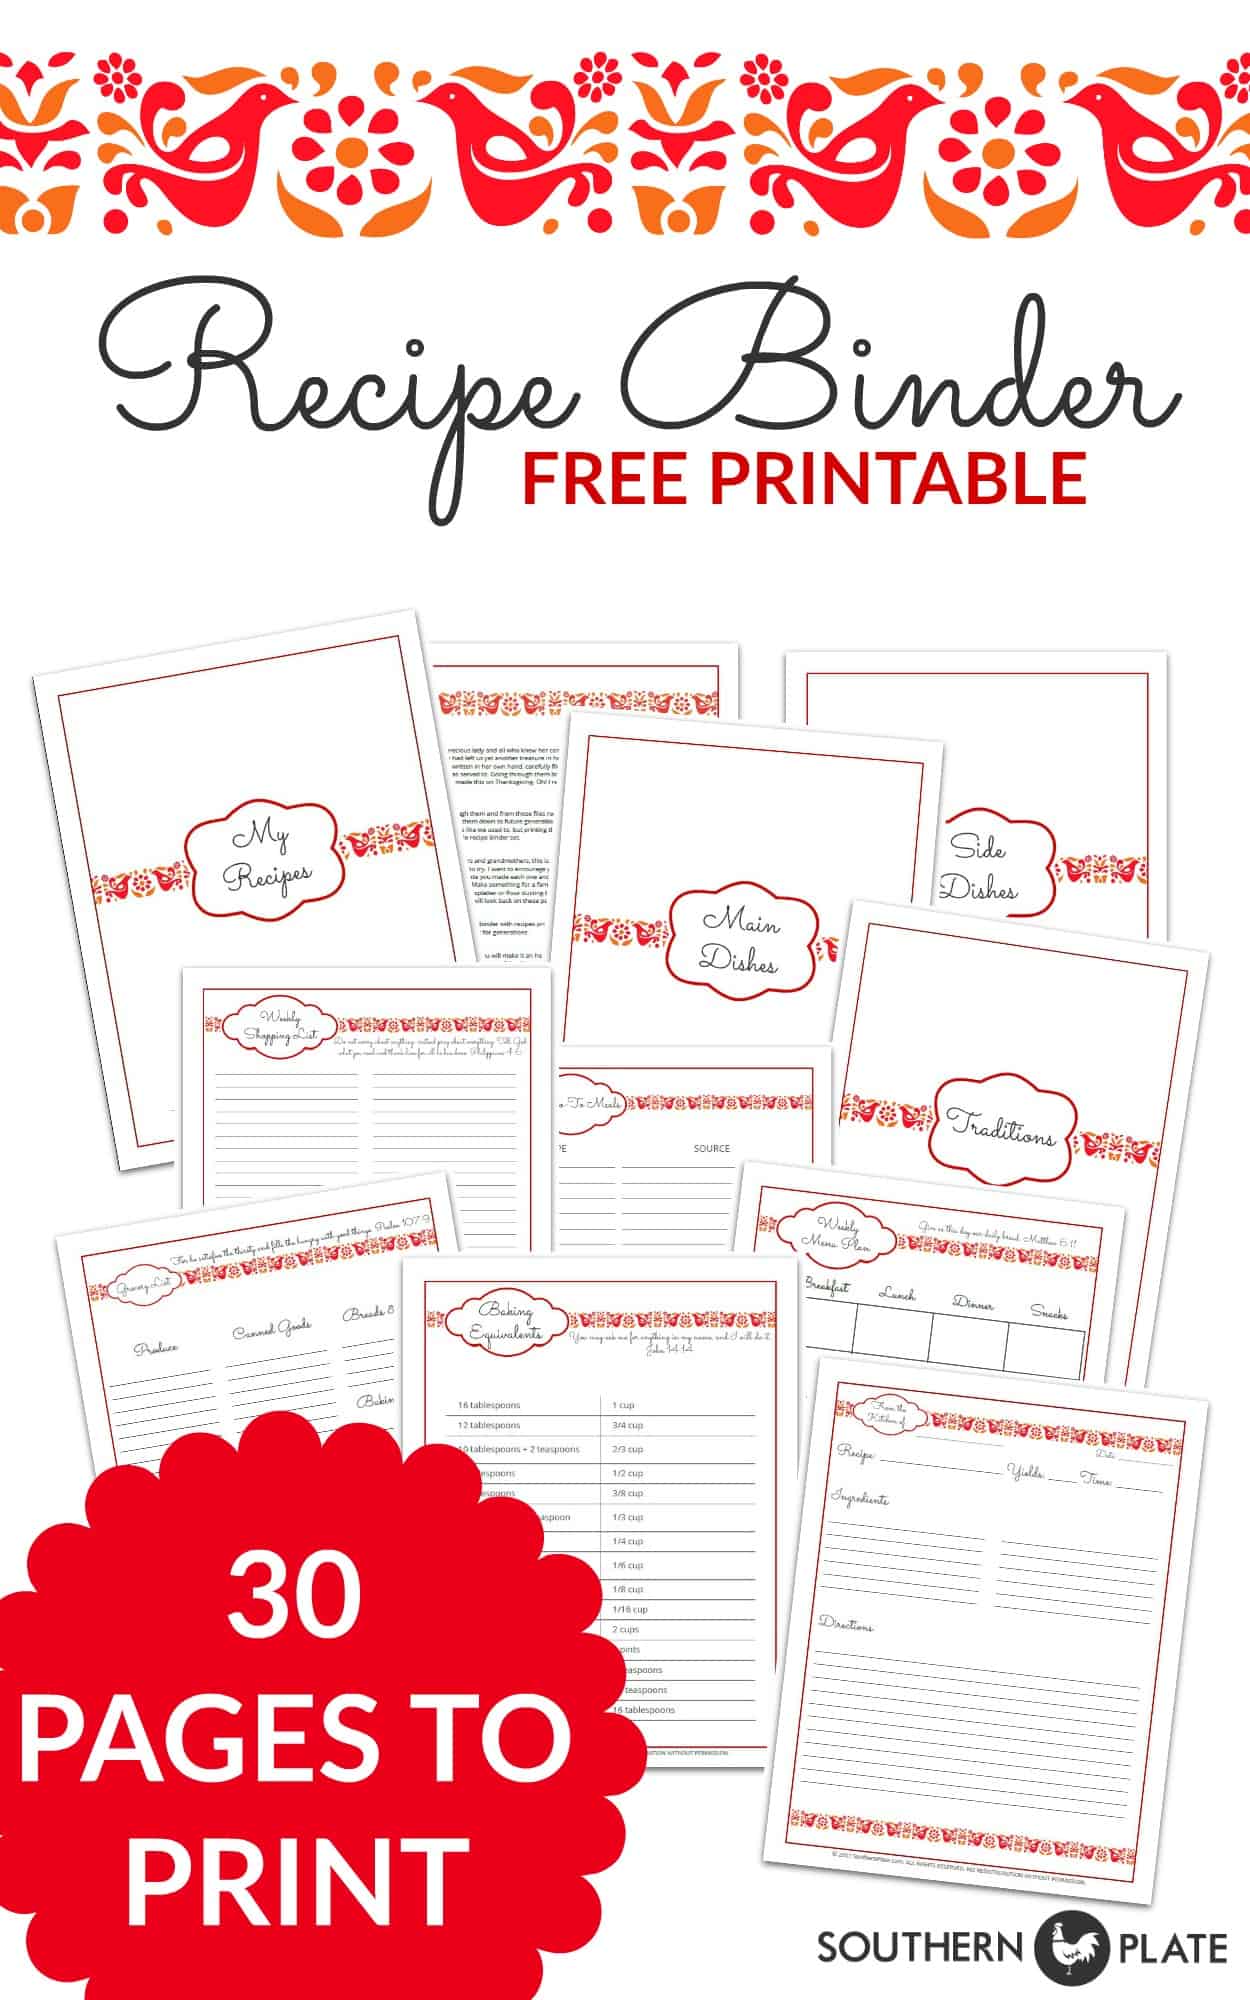 Recipe Binder Printable Set by Southern Plate